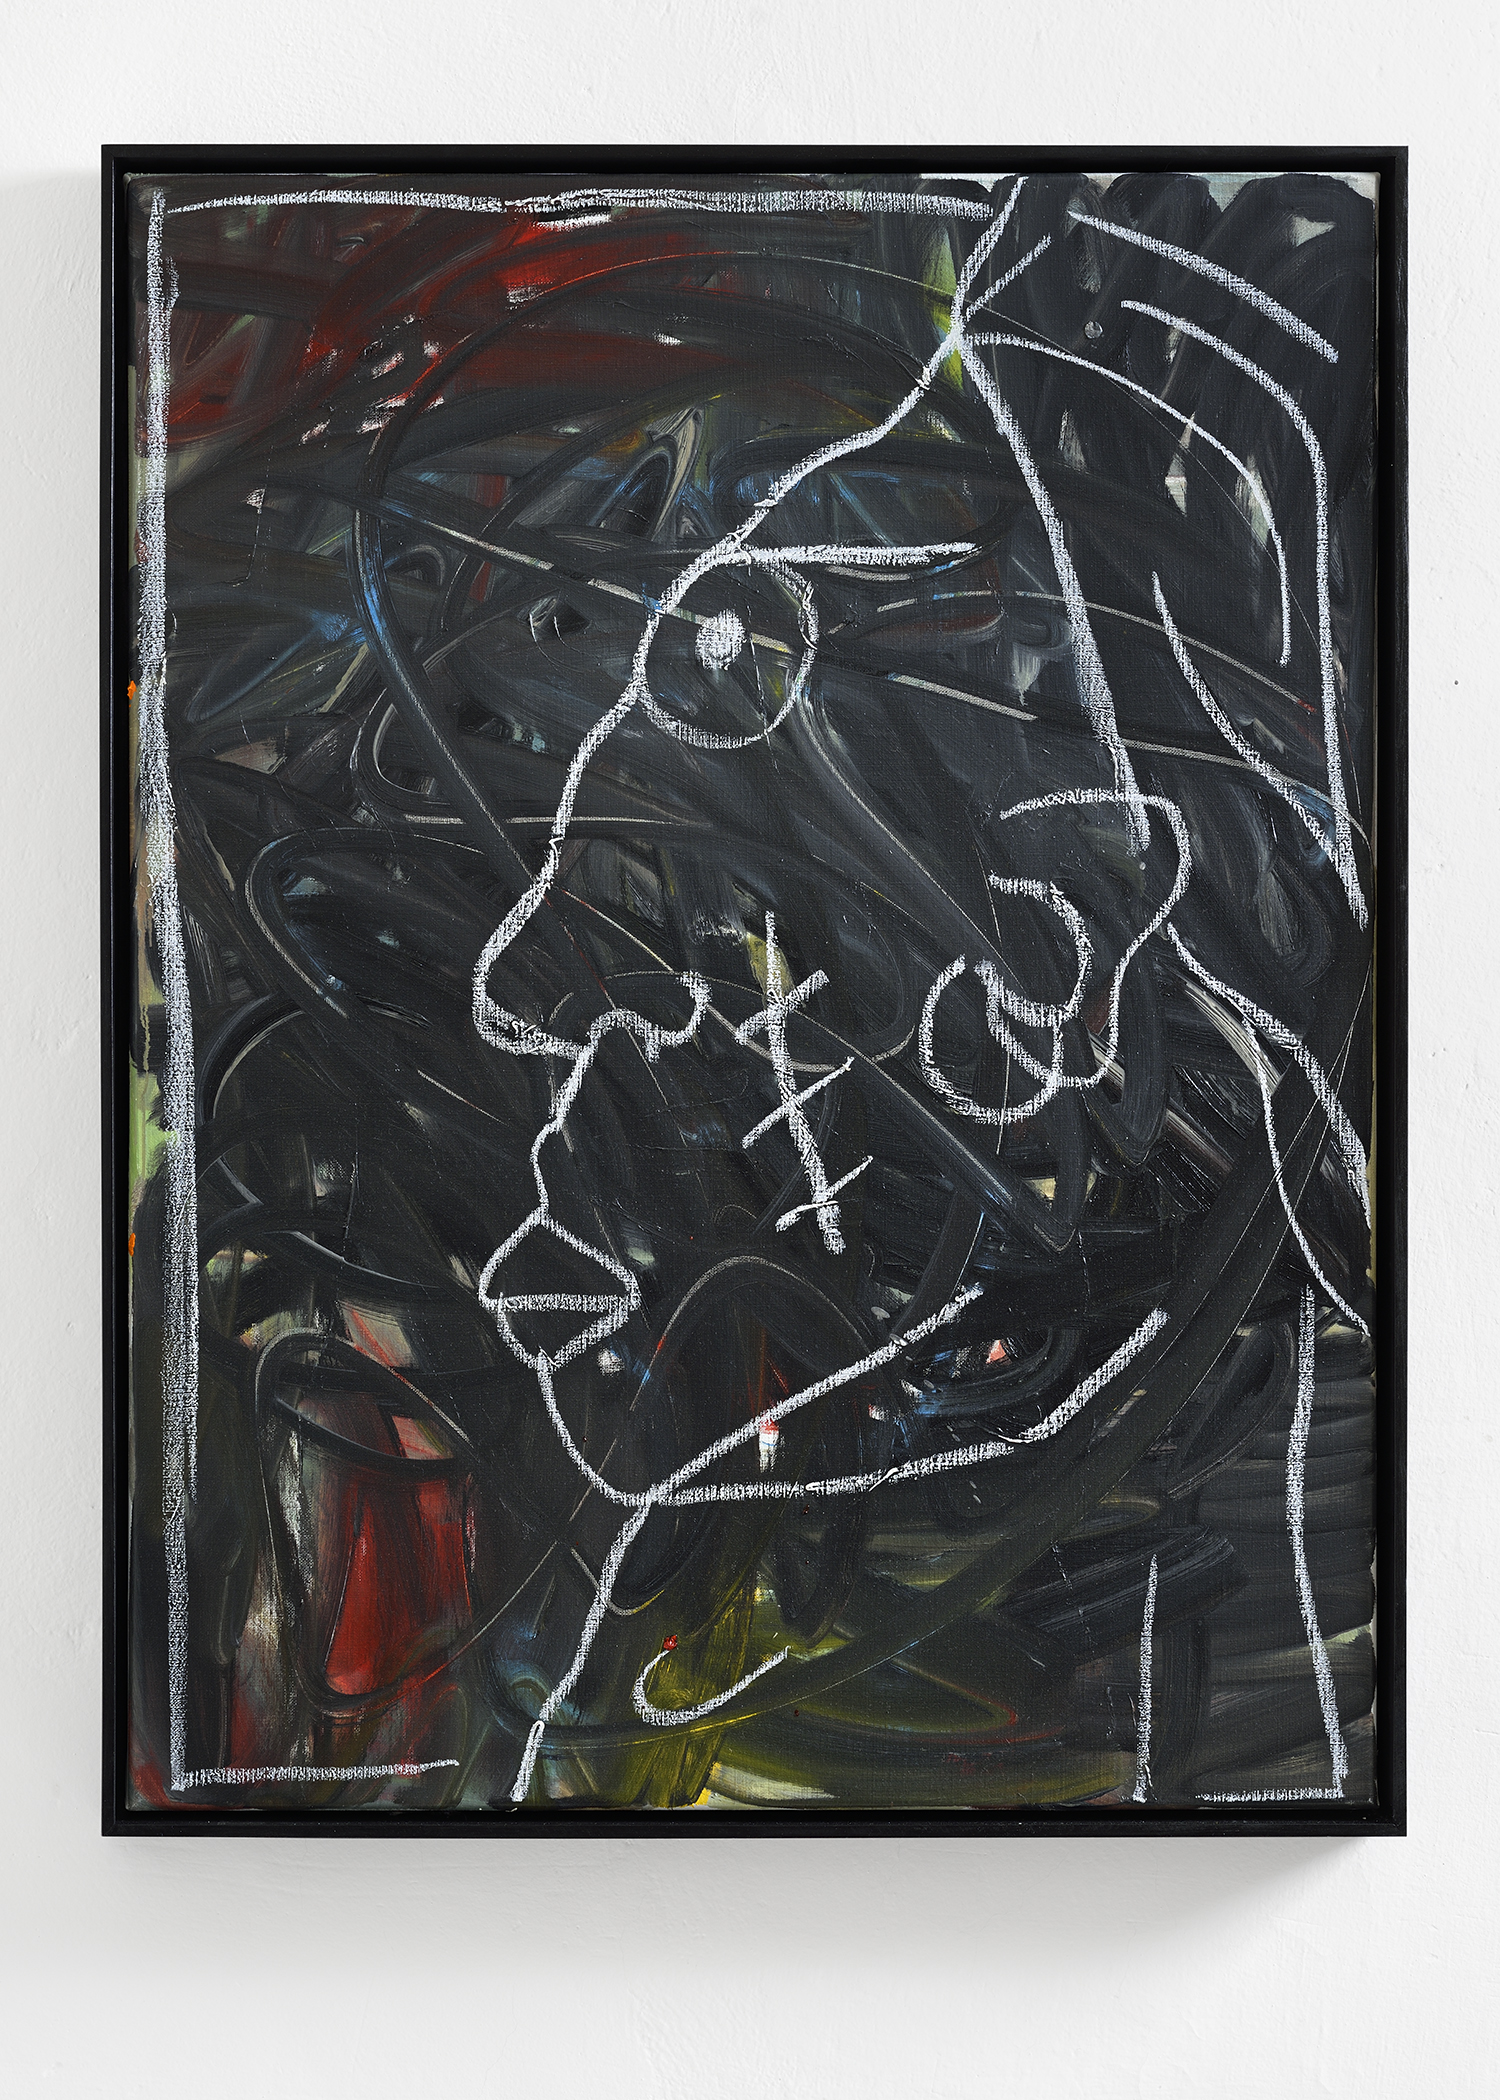  Martin Lukáč  Pirate King , 2019, Oil and oil-stick on canvas, 104 x 80 cm 